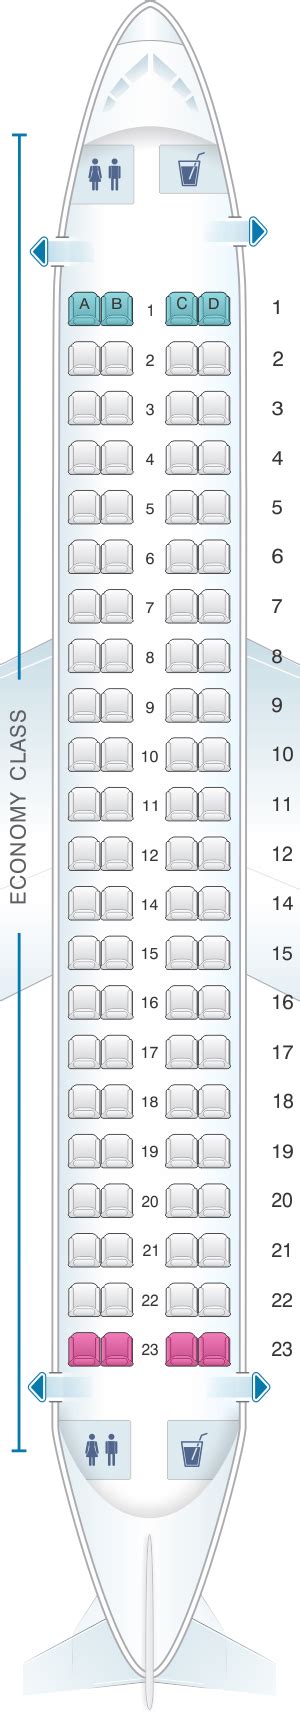 Embraer 175 Seating Cabinets Matttroy